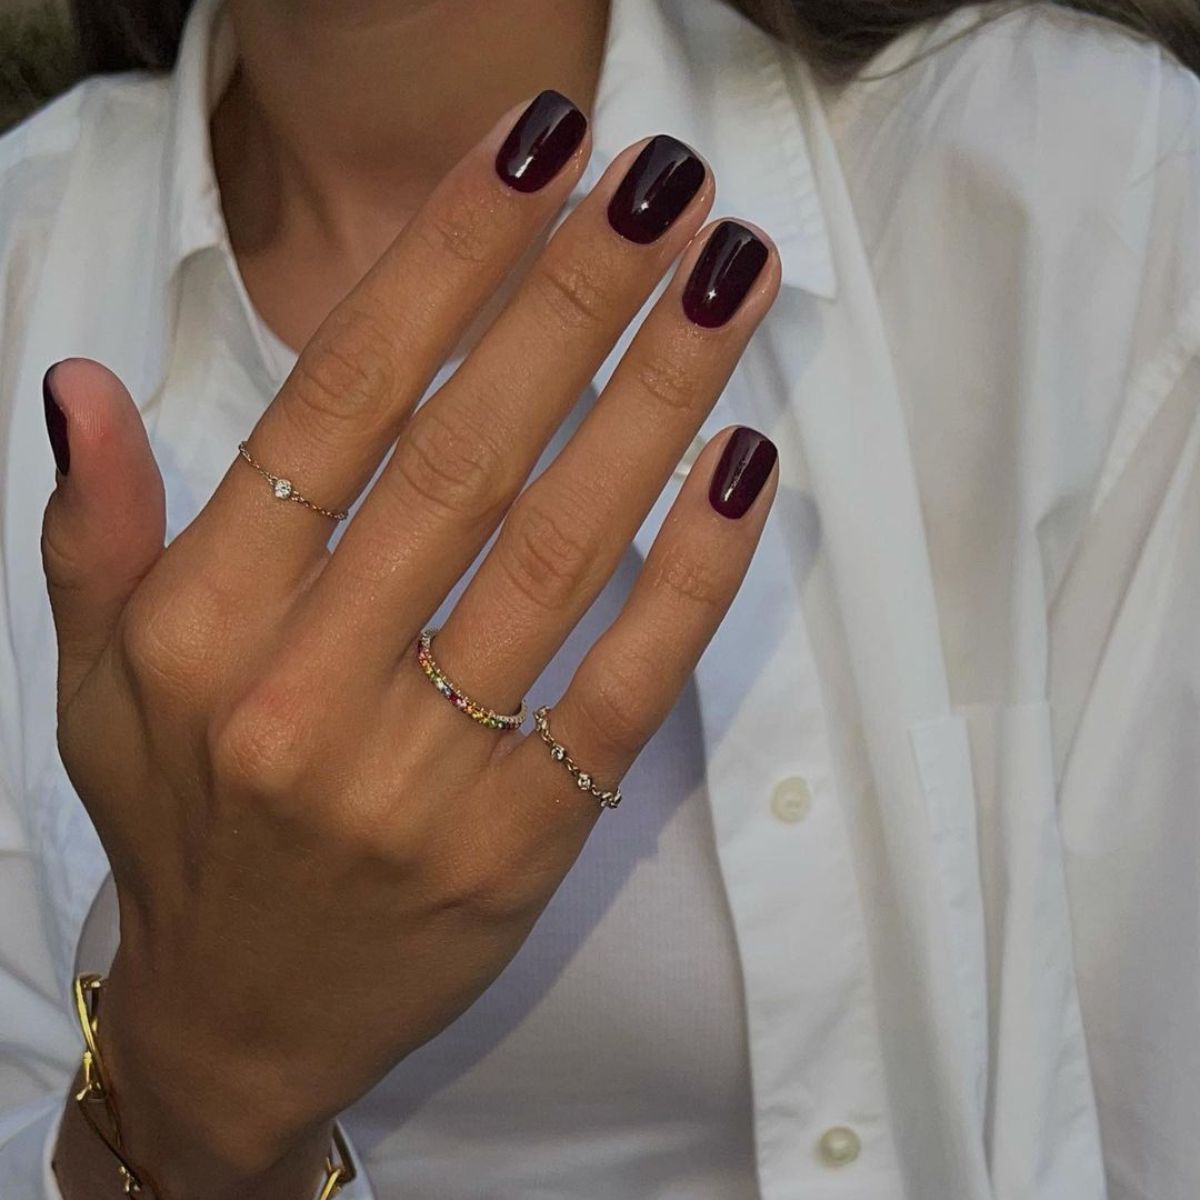 The Top Nail Polish Shades I've Been Seeing All Over Instagram